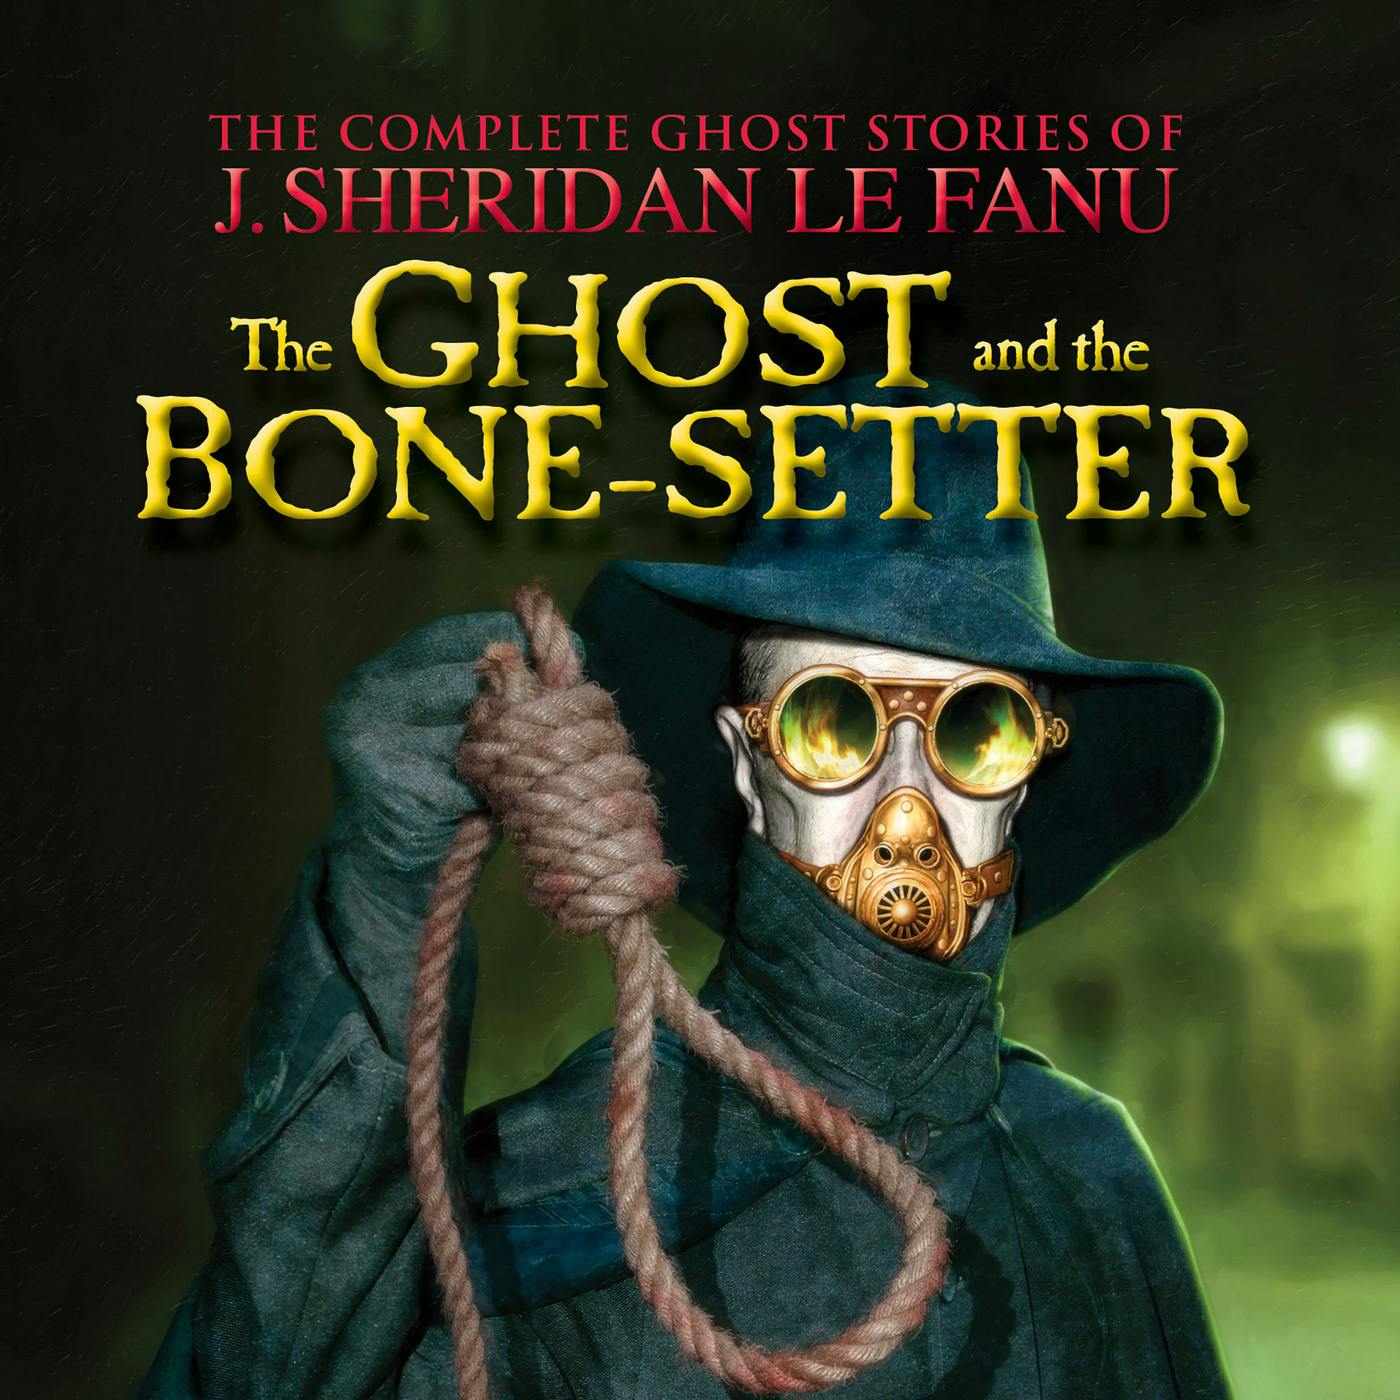 The Ghost and the Bone-setter - The Complete Ghost Stories of J. Sheridan Le Fanu, Vol. 5 of 30 (Unabridged) - J. Sheridan Le Fanu